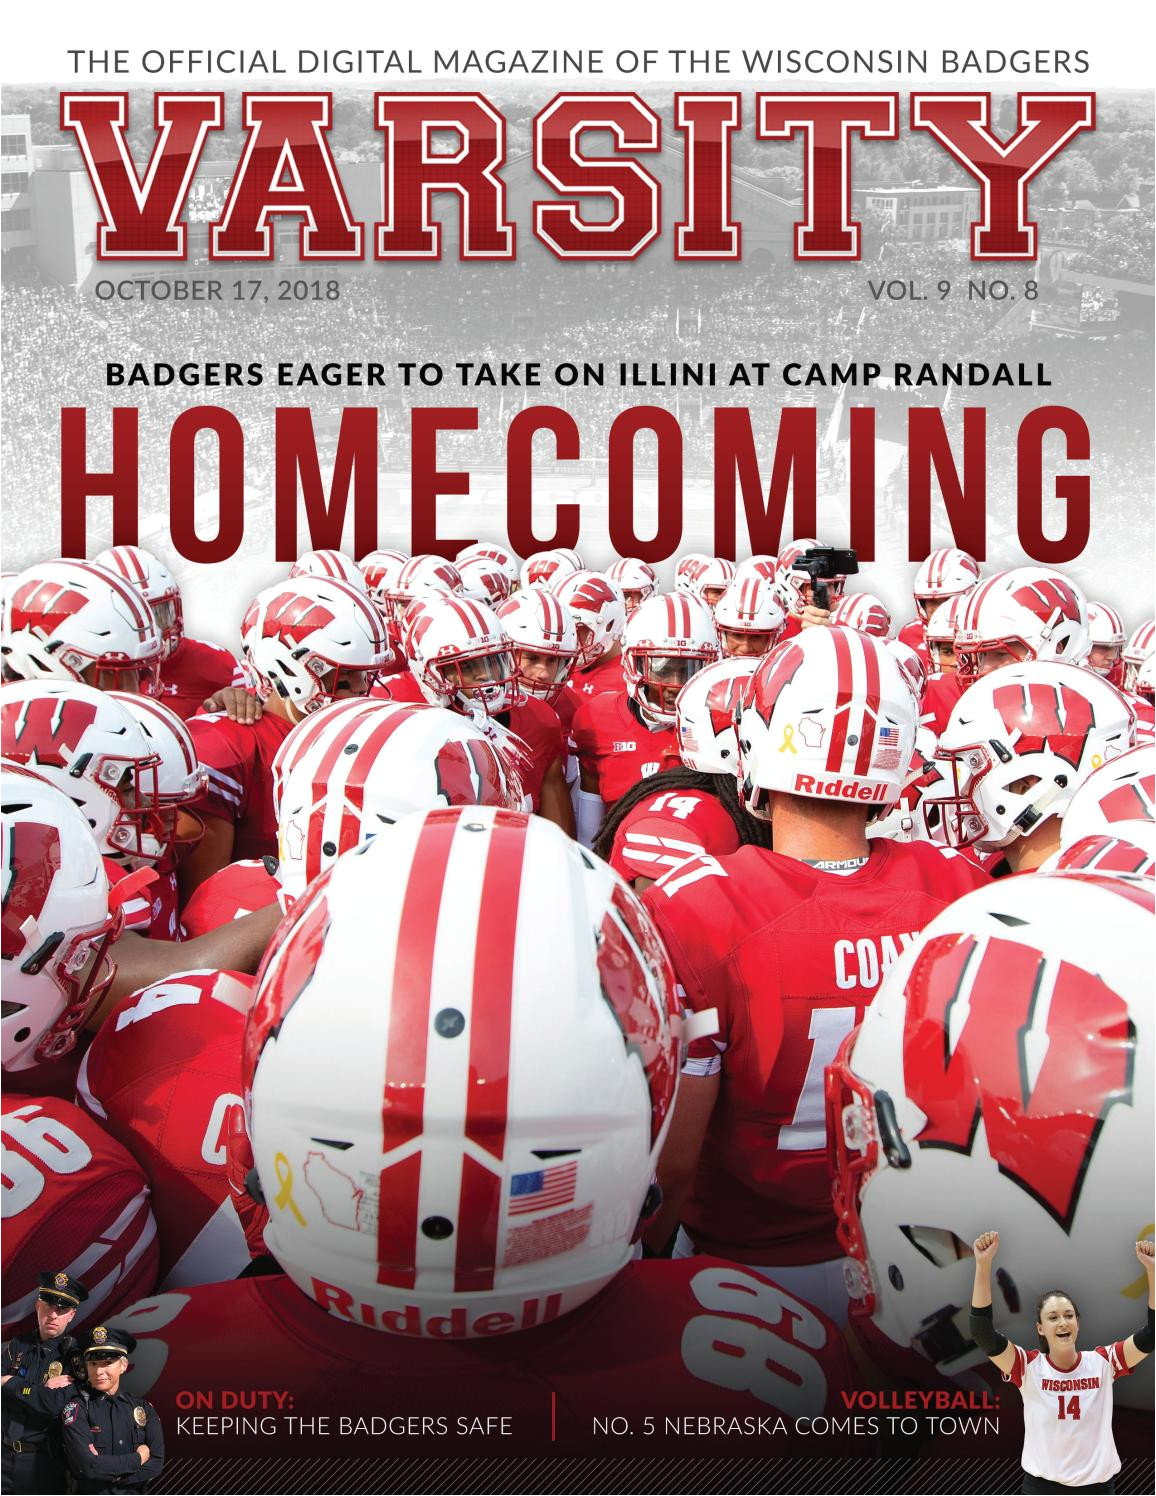 Red River Nm October events Varsity Magazine October 17 2018 by Wisconsin Badgers issuu